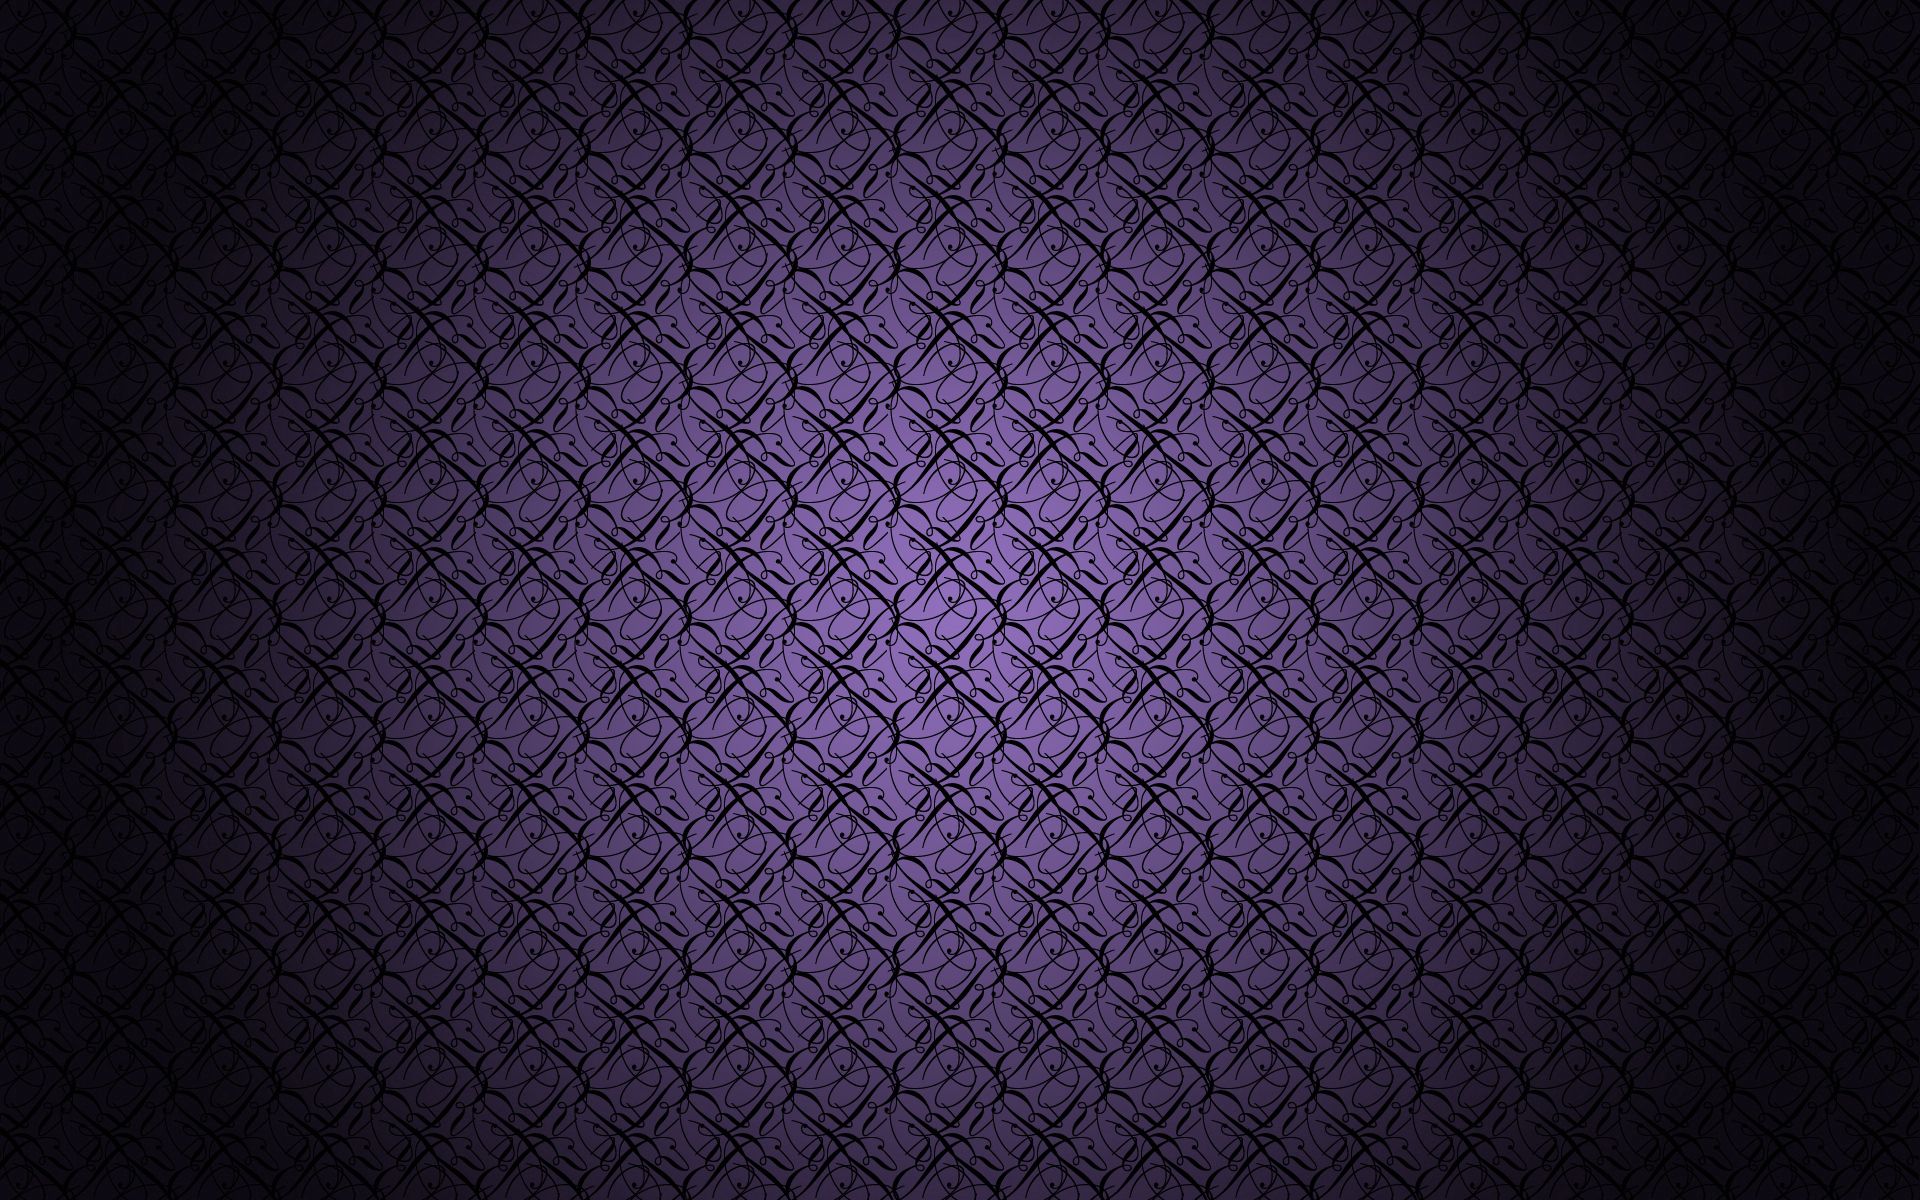 Patterns iPhone wallpapers